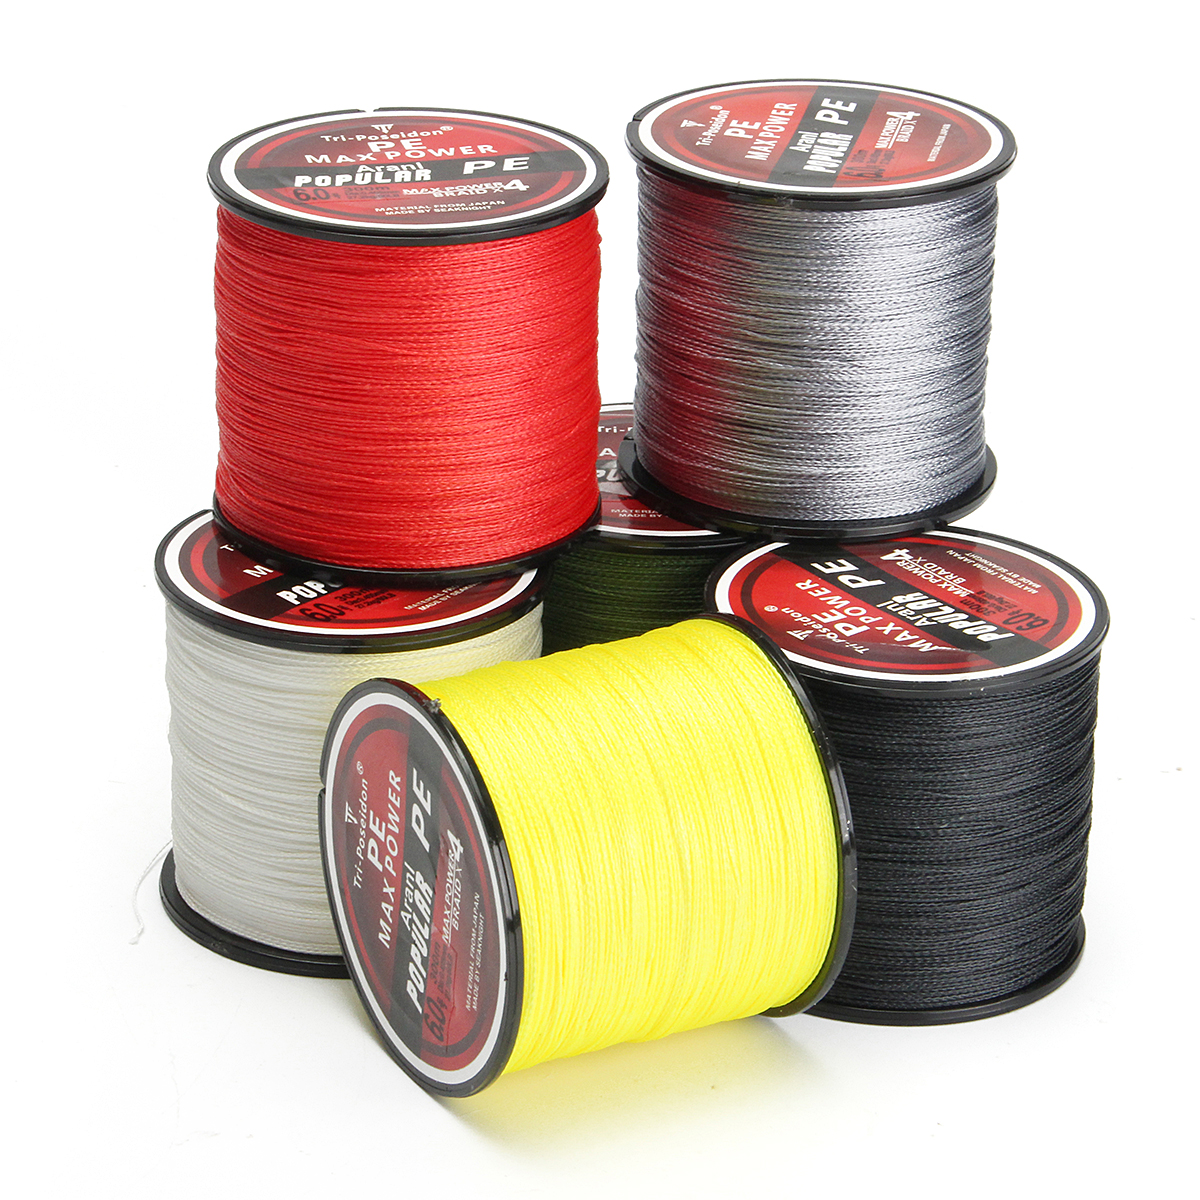 300M-Super-Strong-4-Strands-PE-Spectra-Braided-Wire-Fish-Rope-Sea-Fishing-Lines-8-60LB-1365437-6